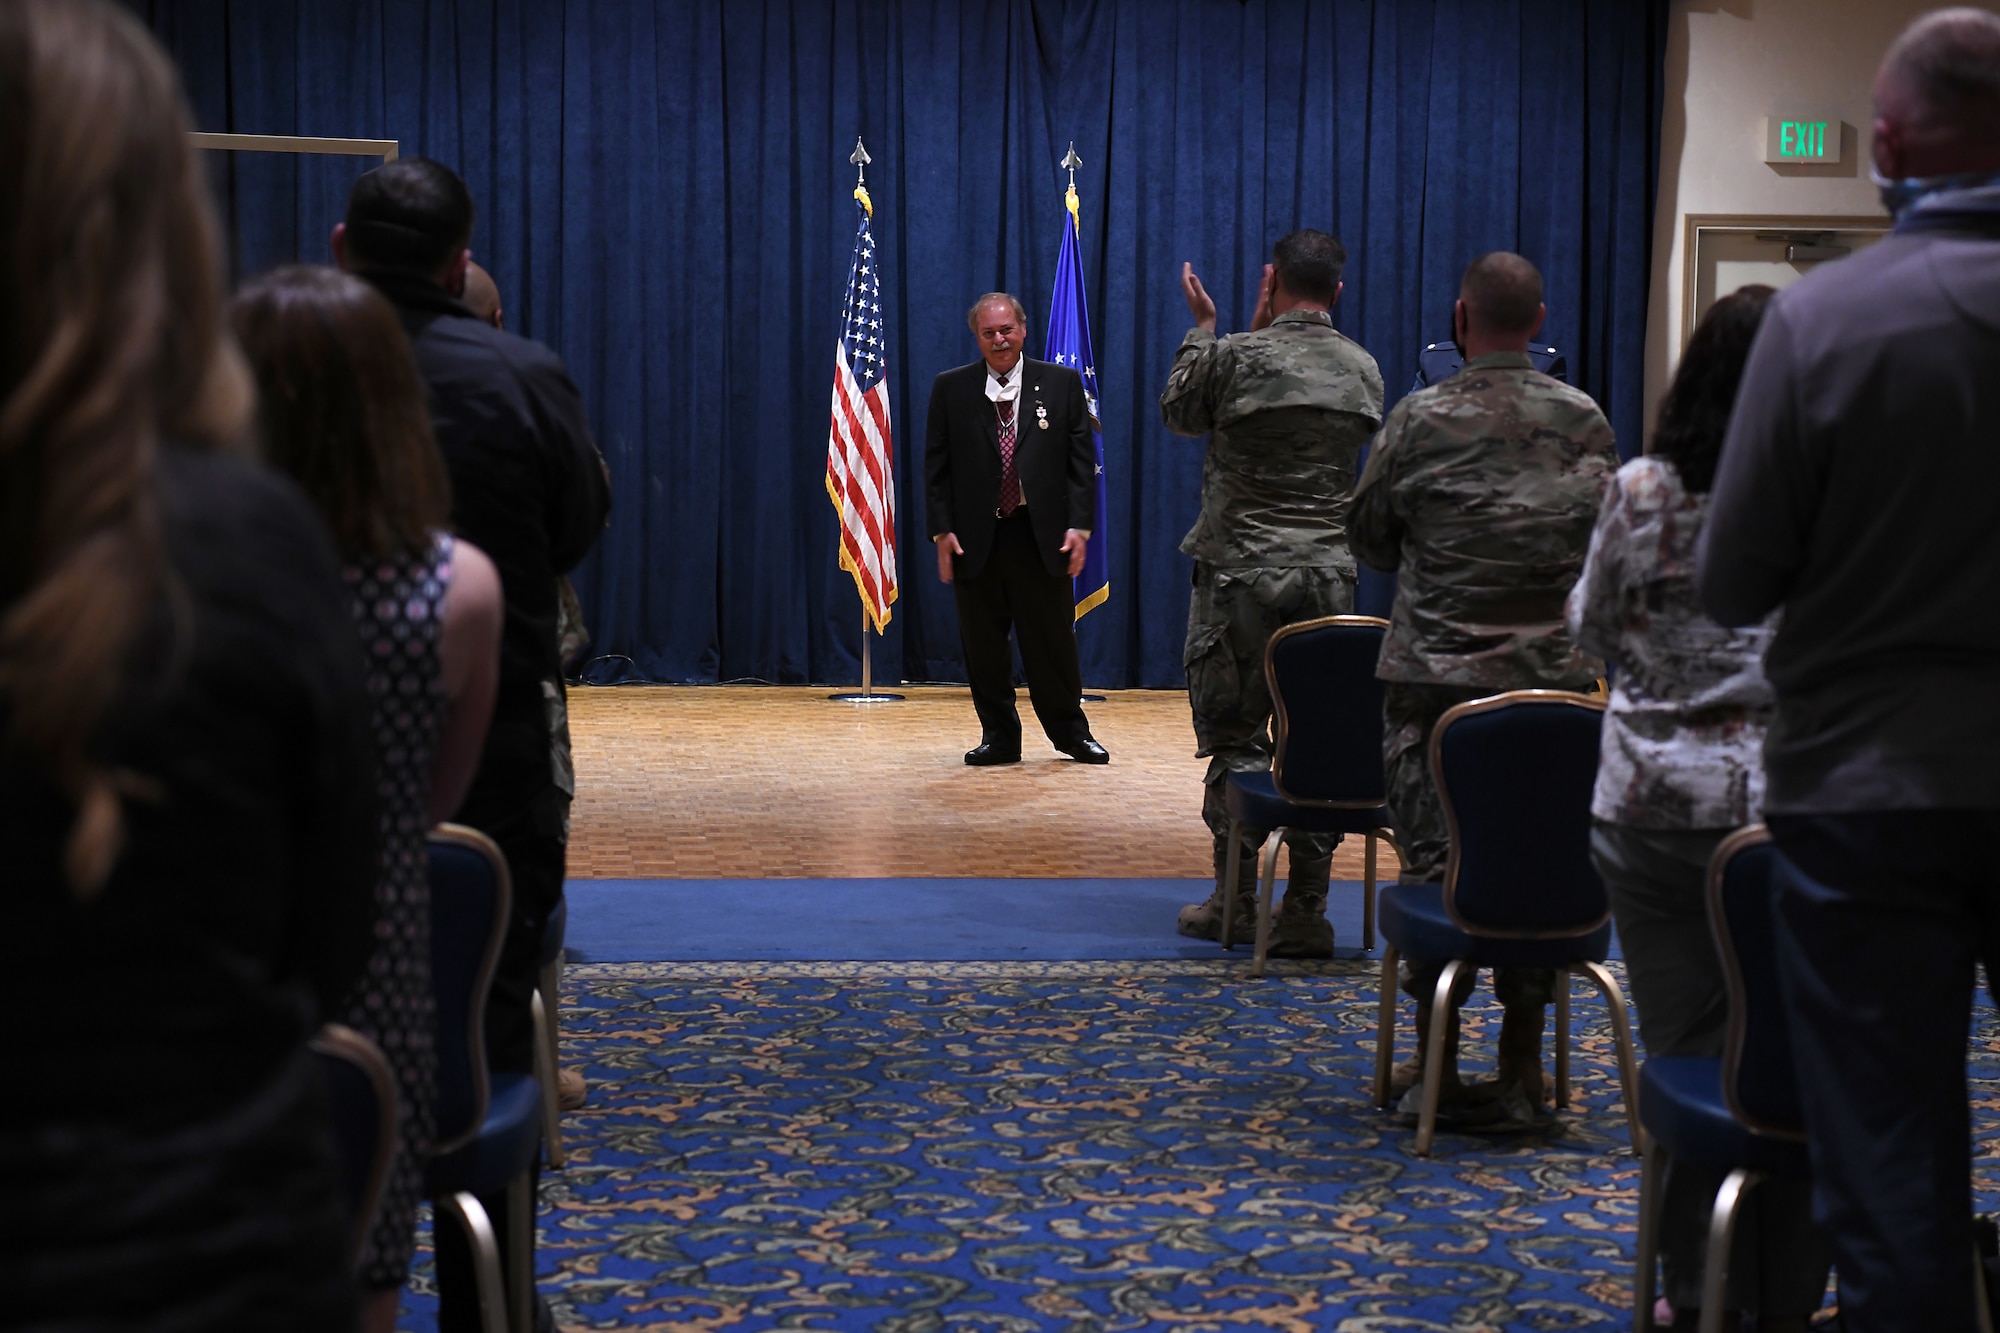 The crowd stands and applauds as Richard Cote, 30th Civil Engineer Squadron deputy commander, retires after nearly 40 years of service in the 30th CES June 25, 2020, at Vandenberg Air Force Base, Calif.